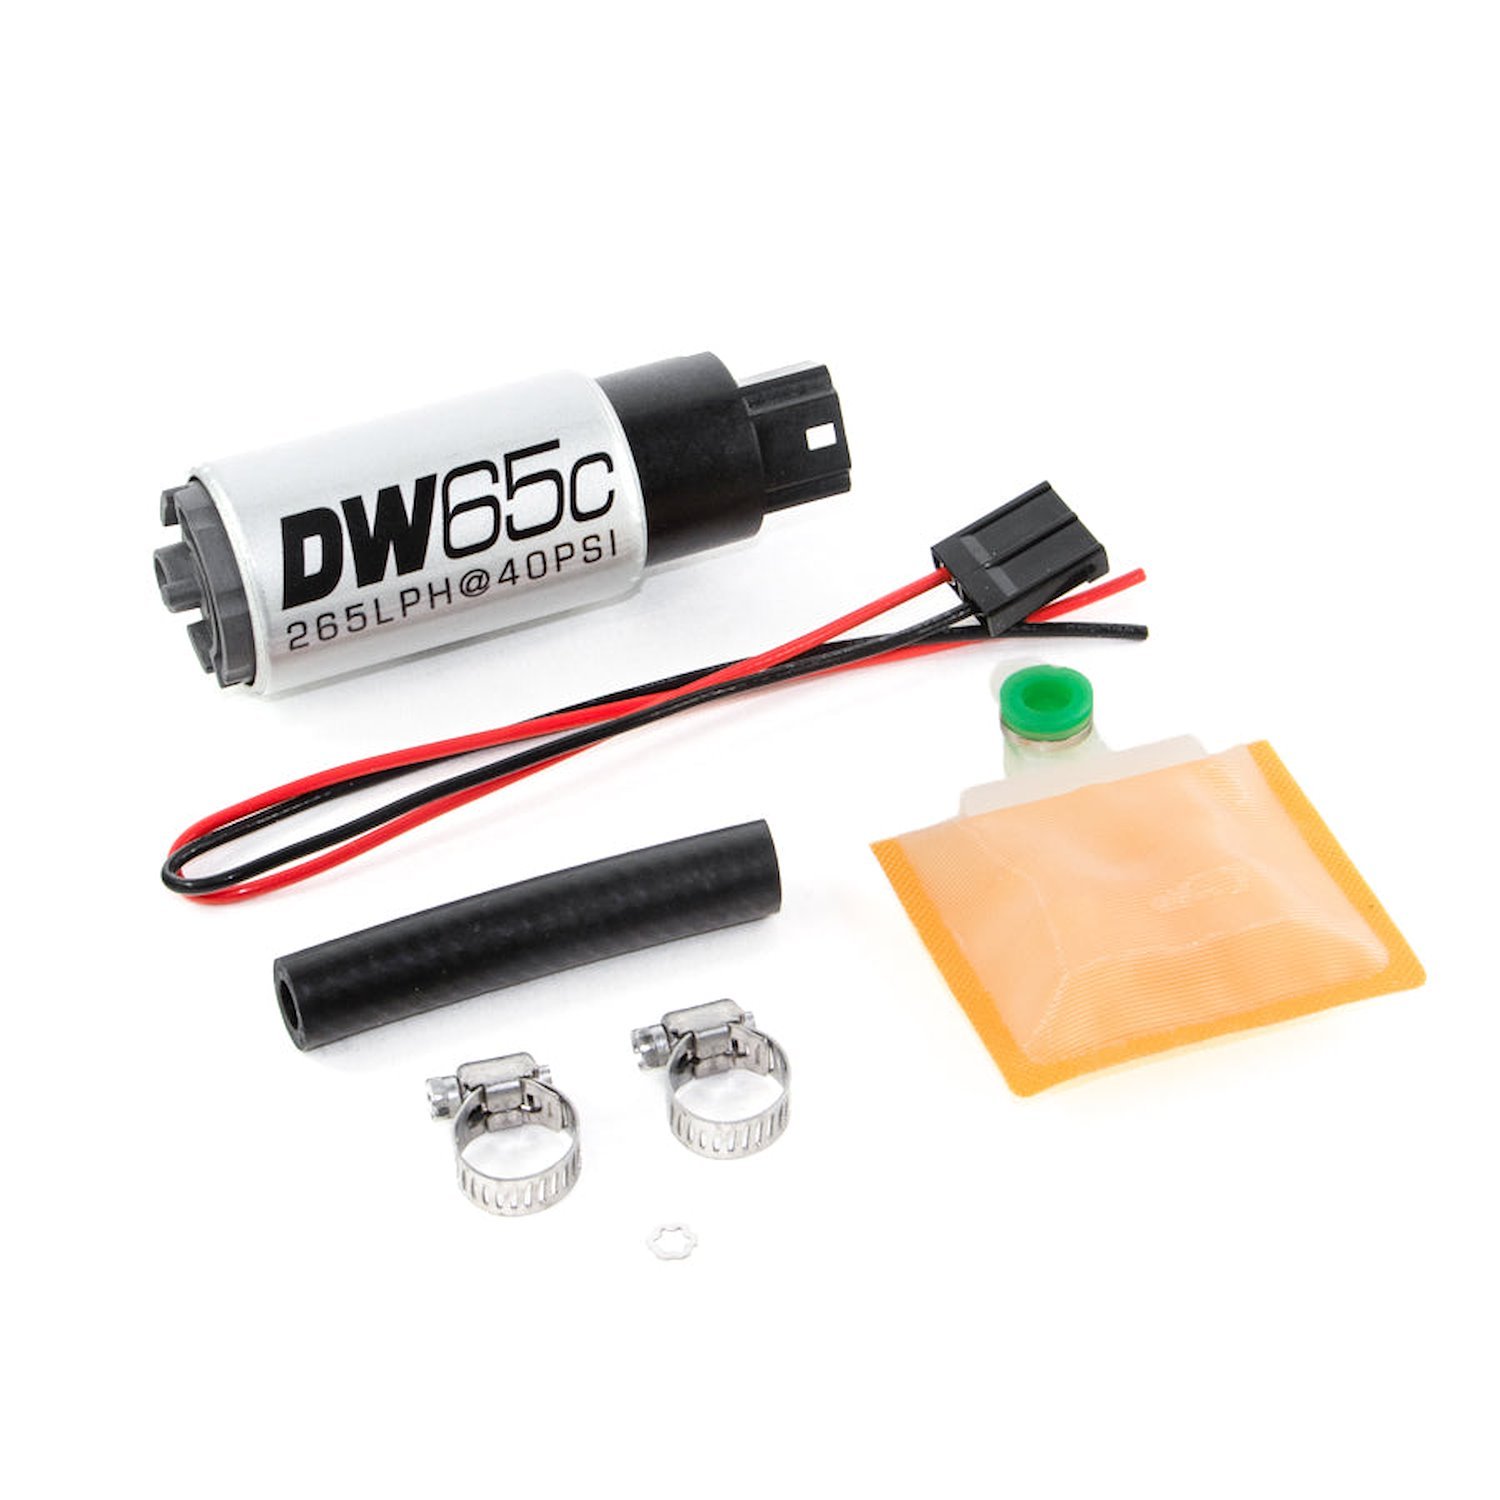 96511000 DW65C series 265lph compact fuel pump without mounting clips w/ universal install kit